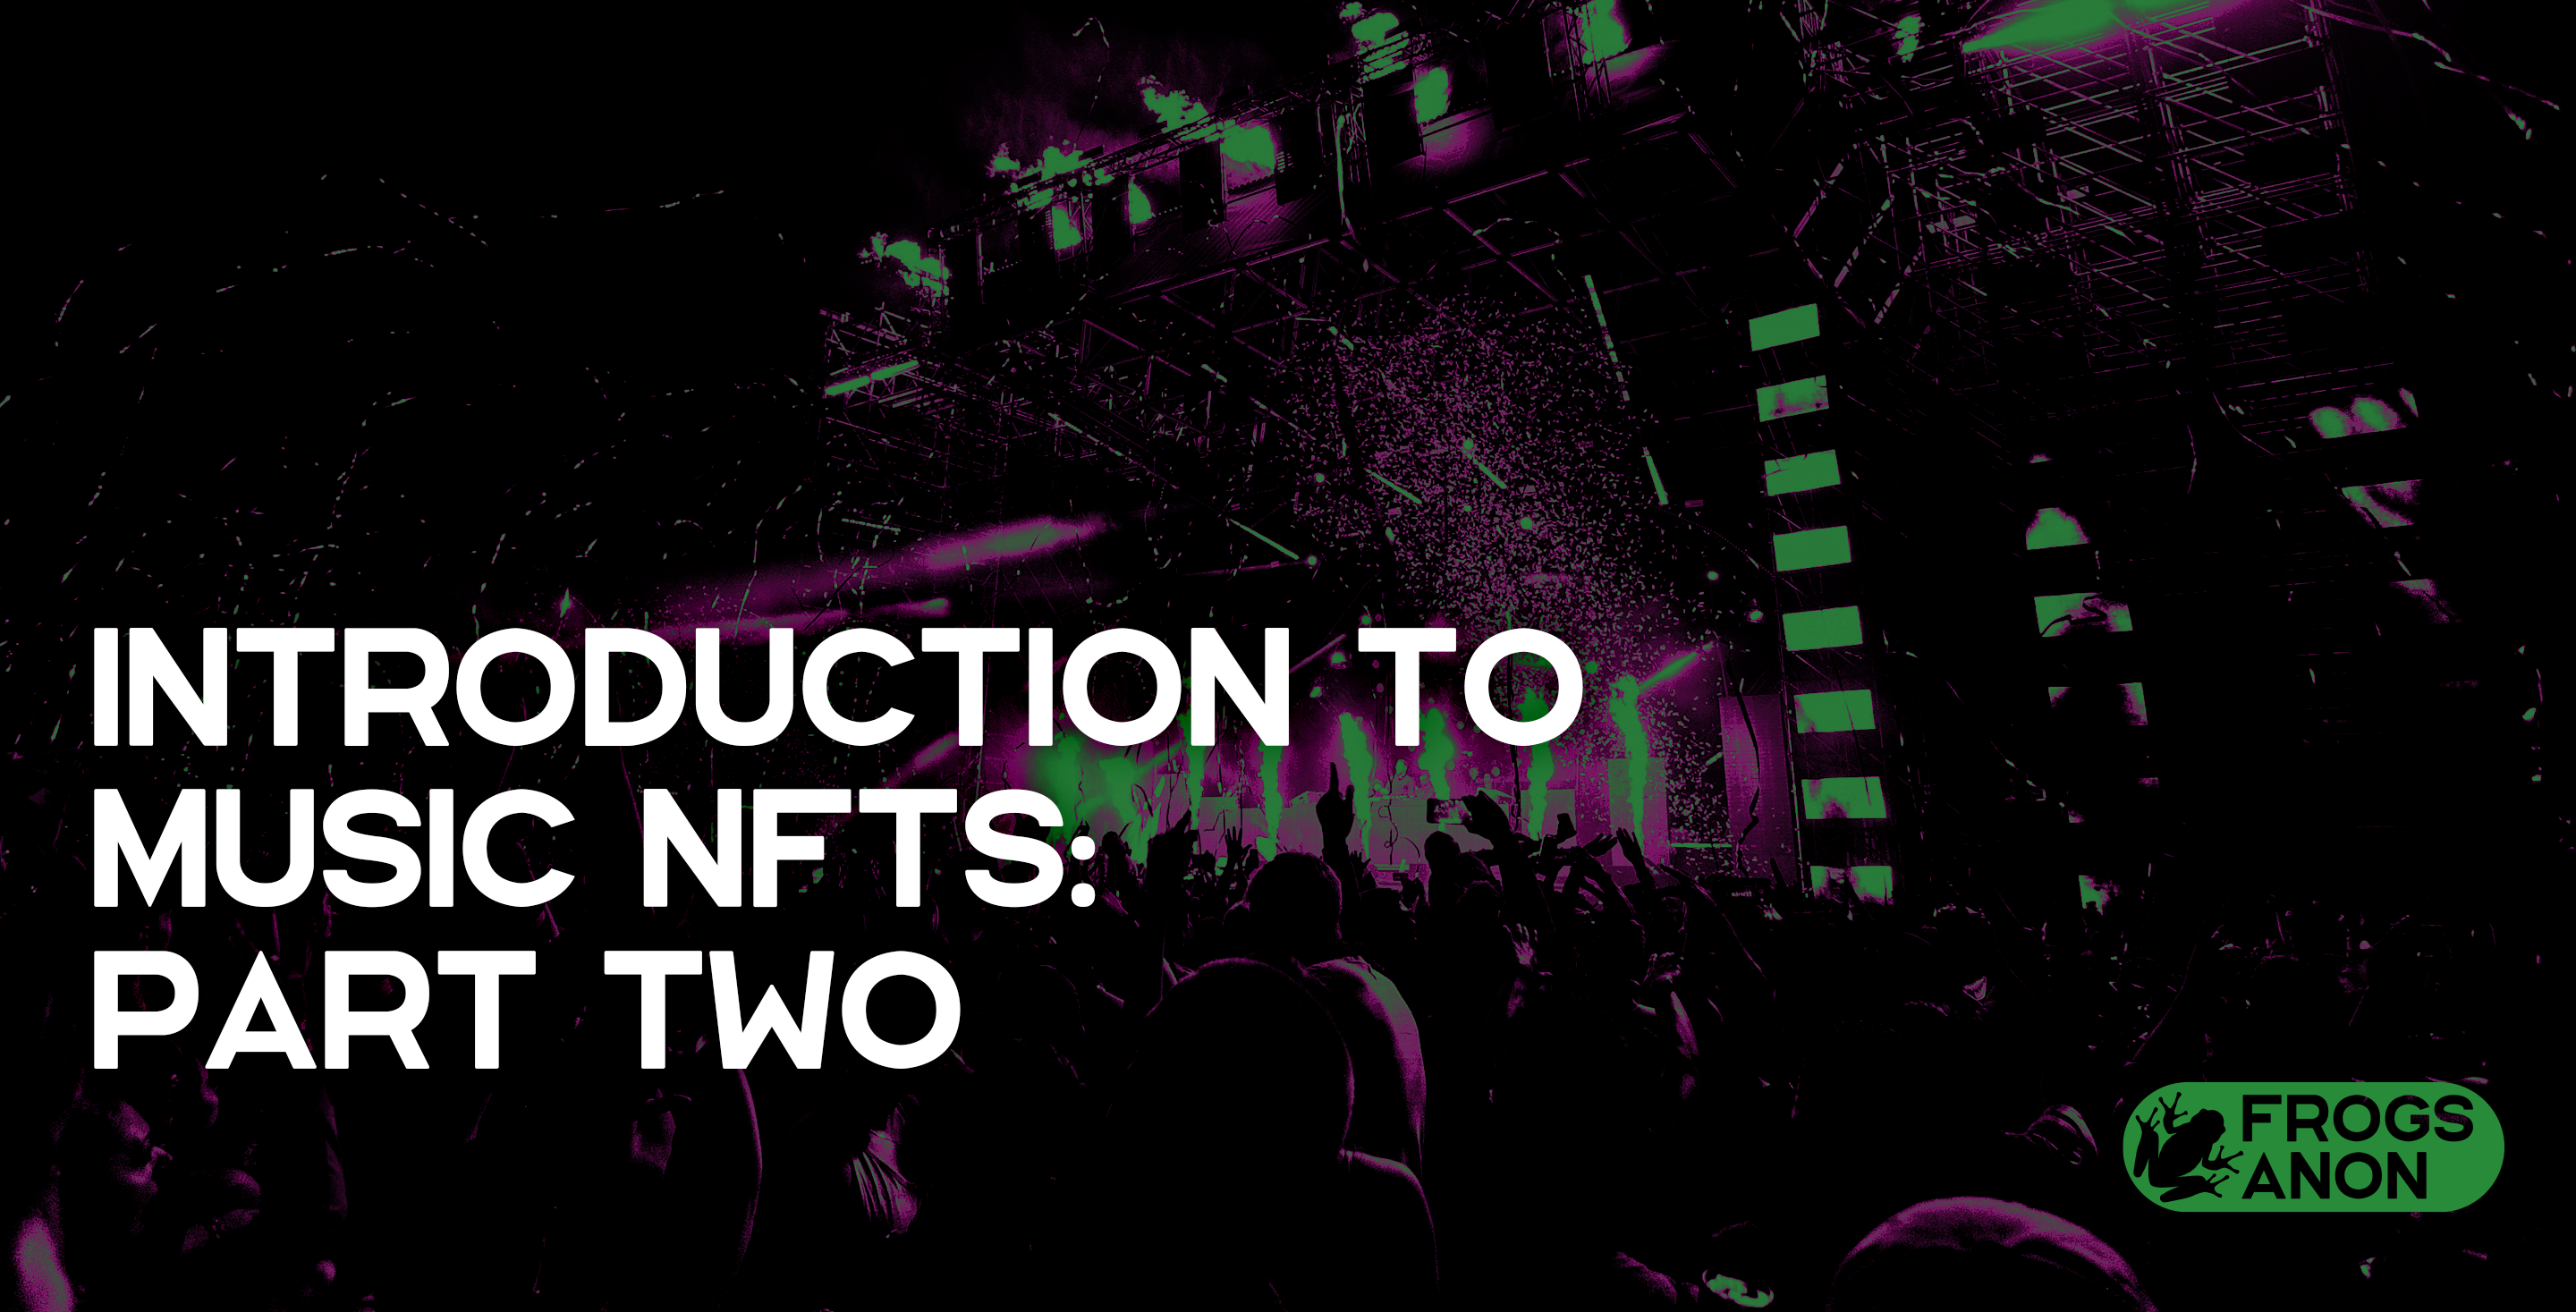 Introduction to Music NFTs: Part Two